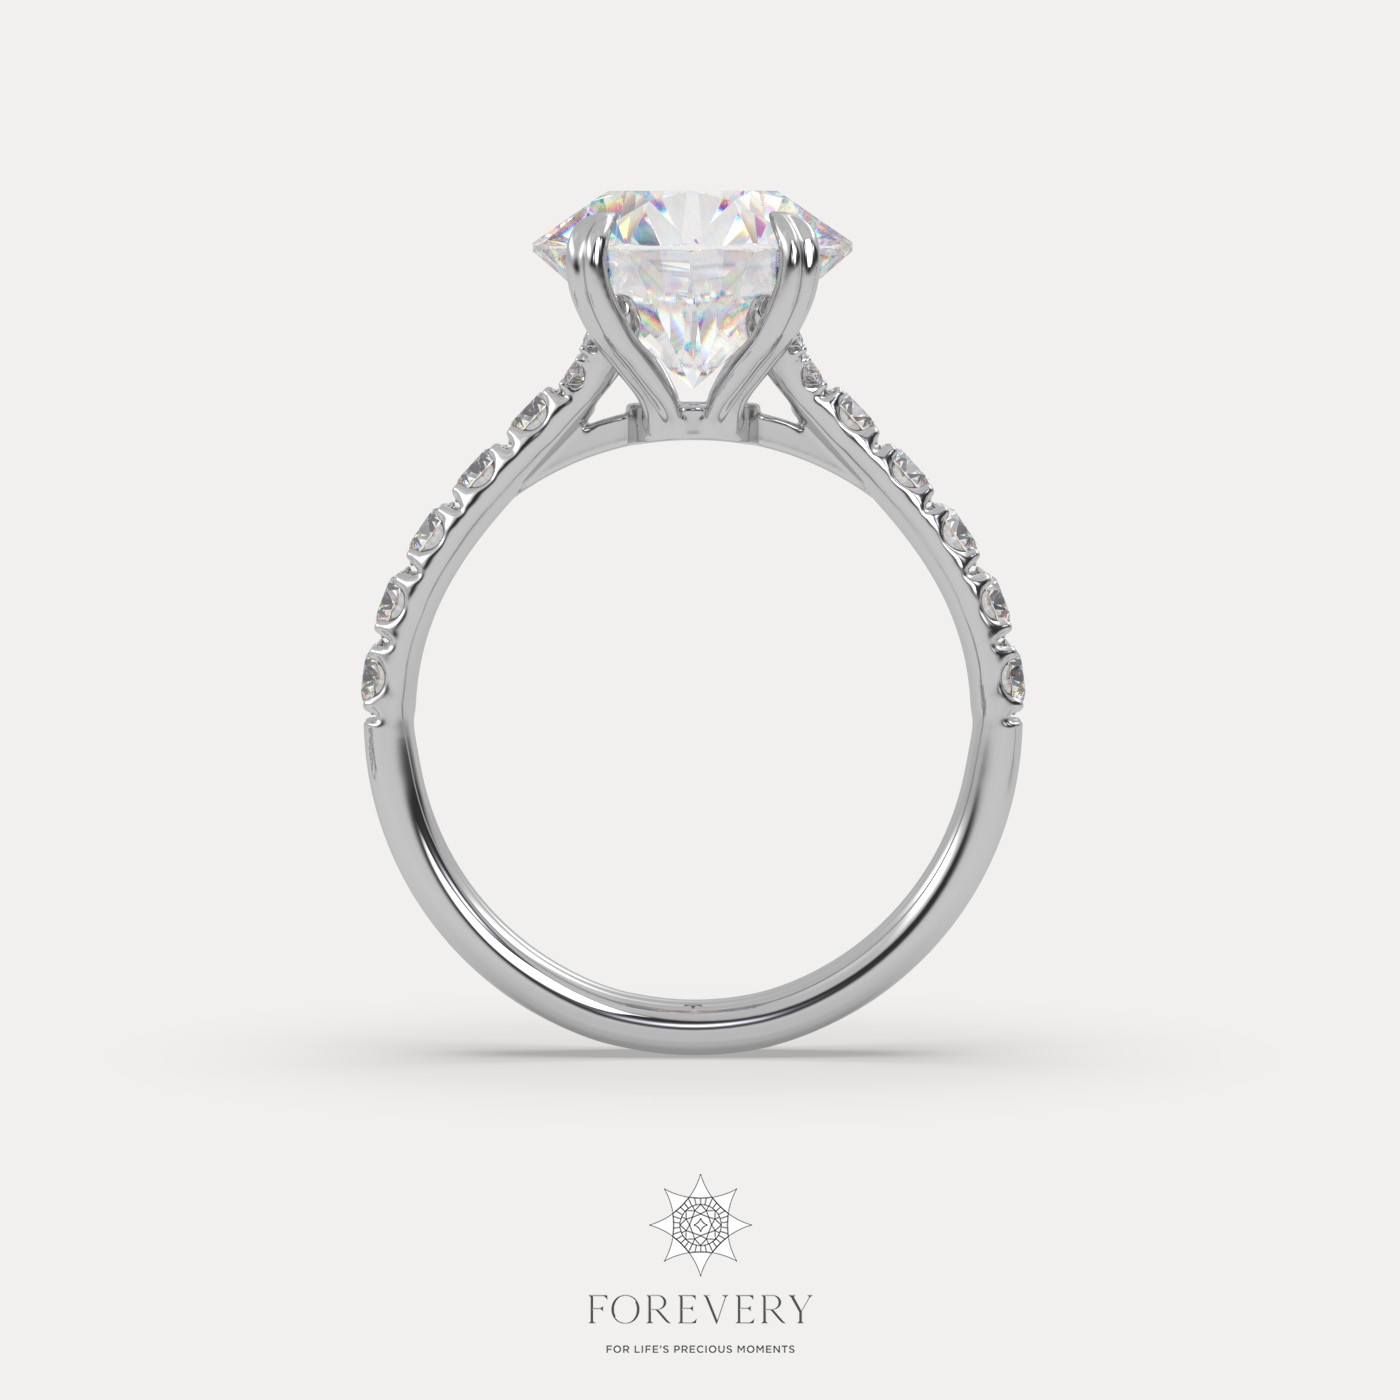 18K WHITE GOLD Round Cut Pave-Style Diamond Engagament Ring